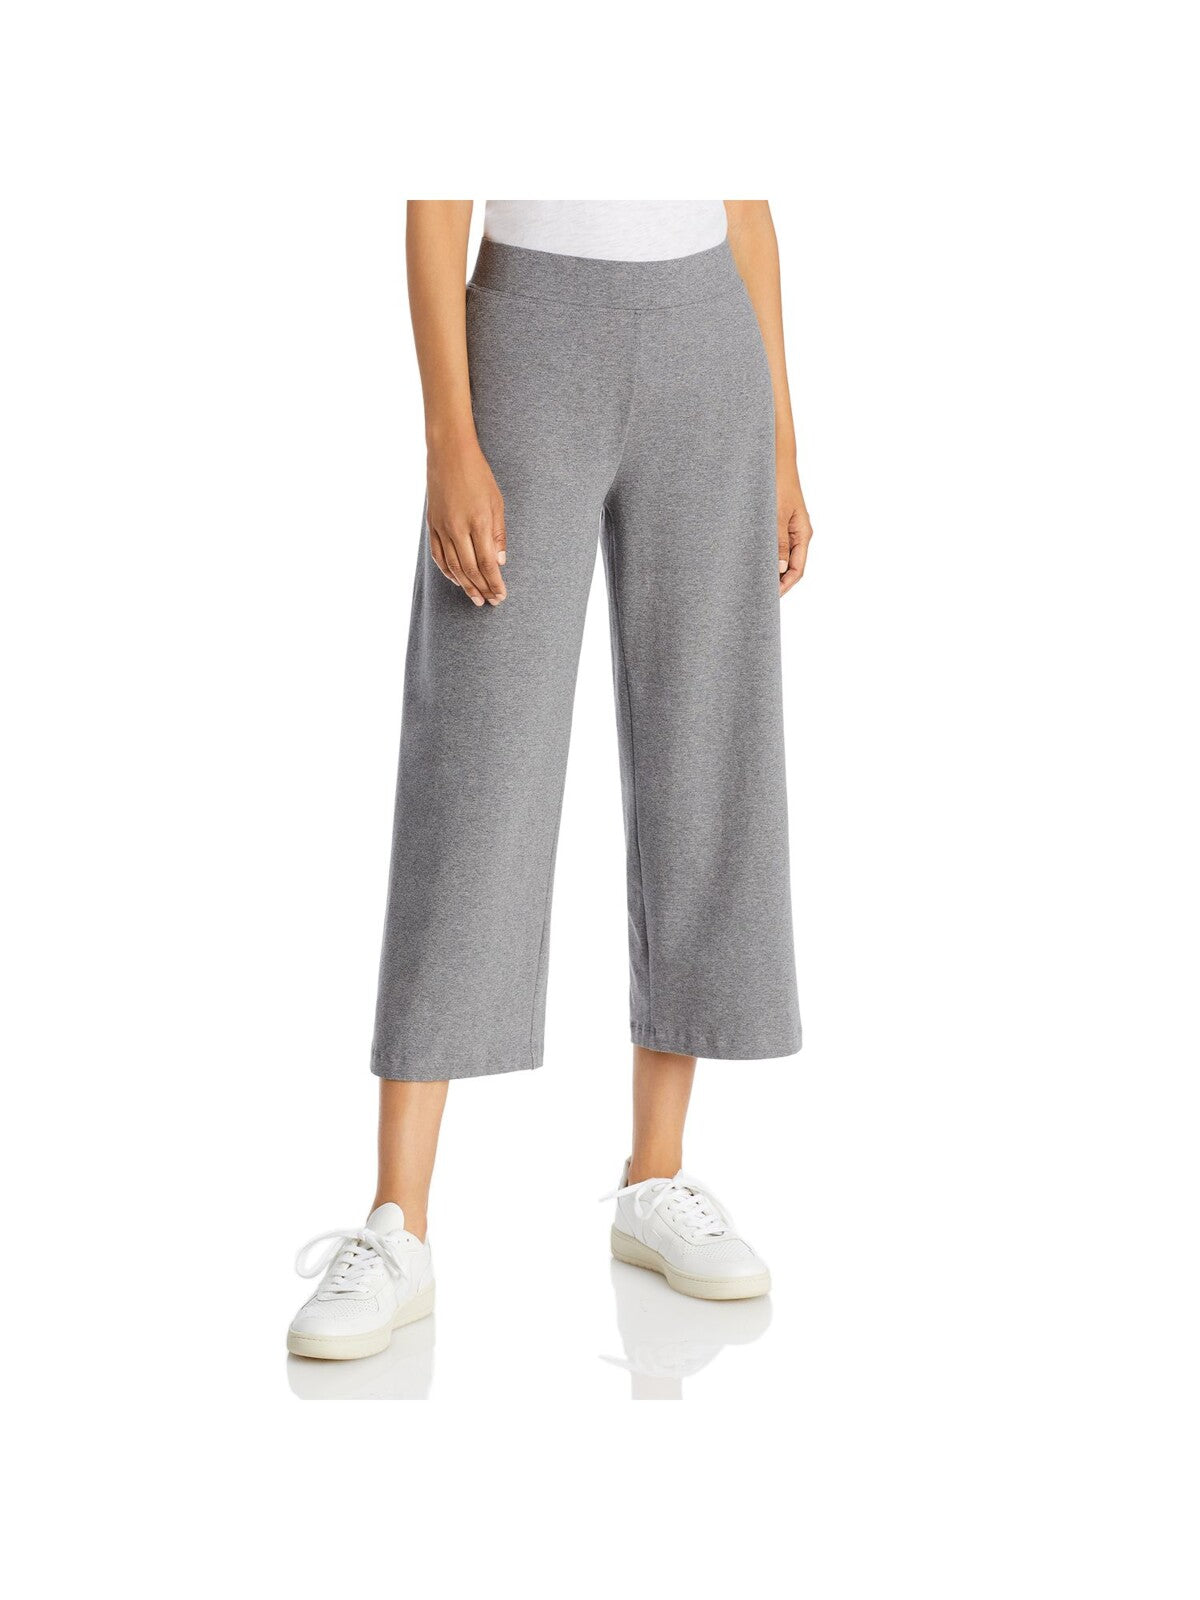 EILEEN FISHER Womens Gray Stretch Heather Cropped Pants XS